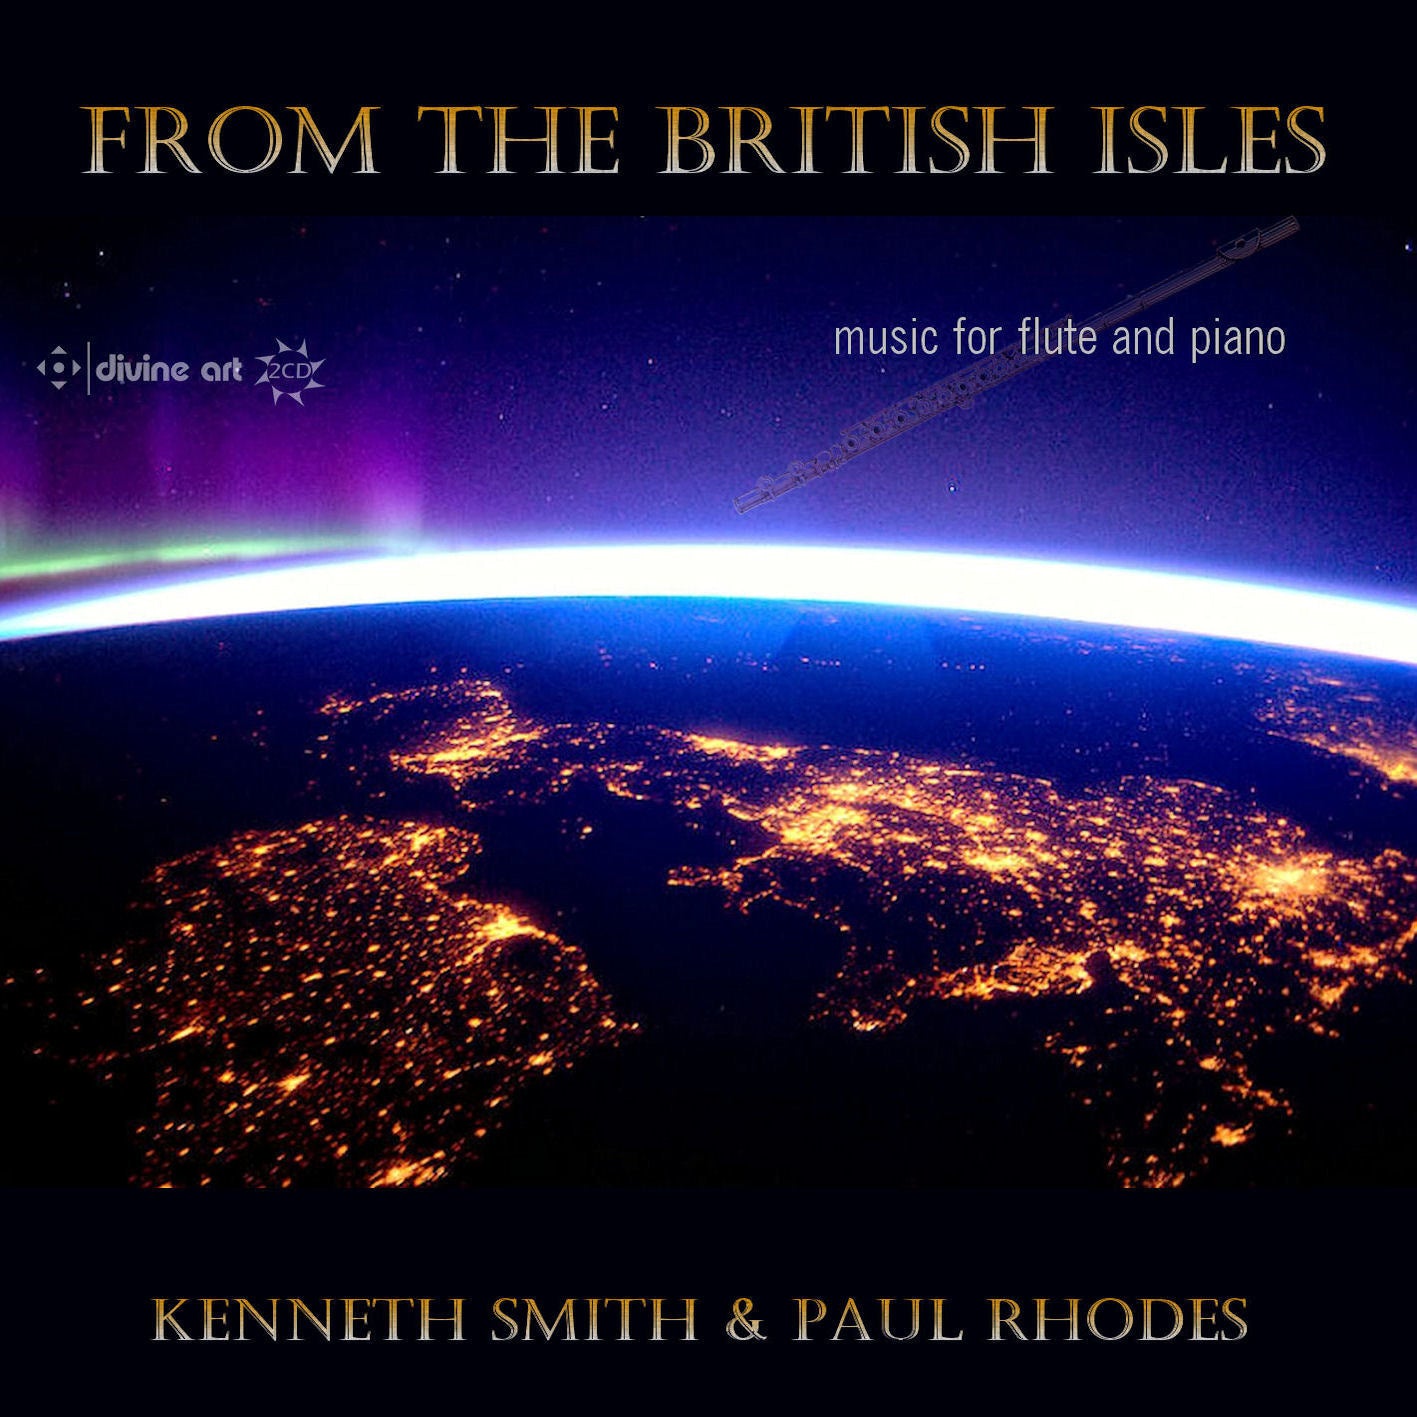 From the British Isles / Smith, Rhodes